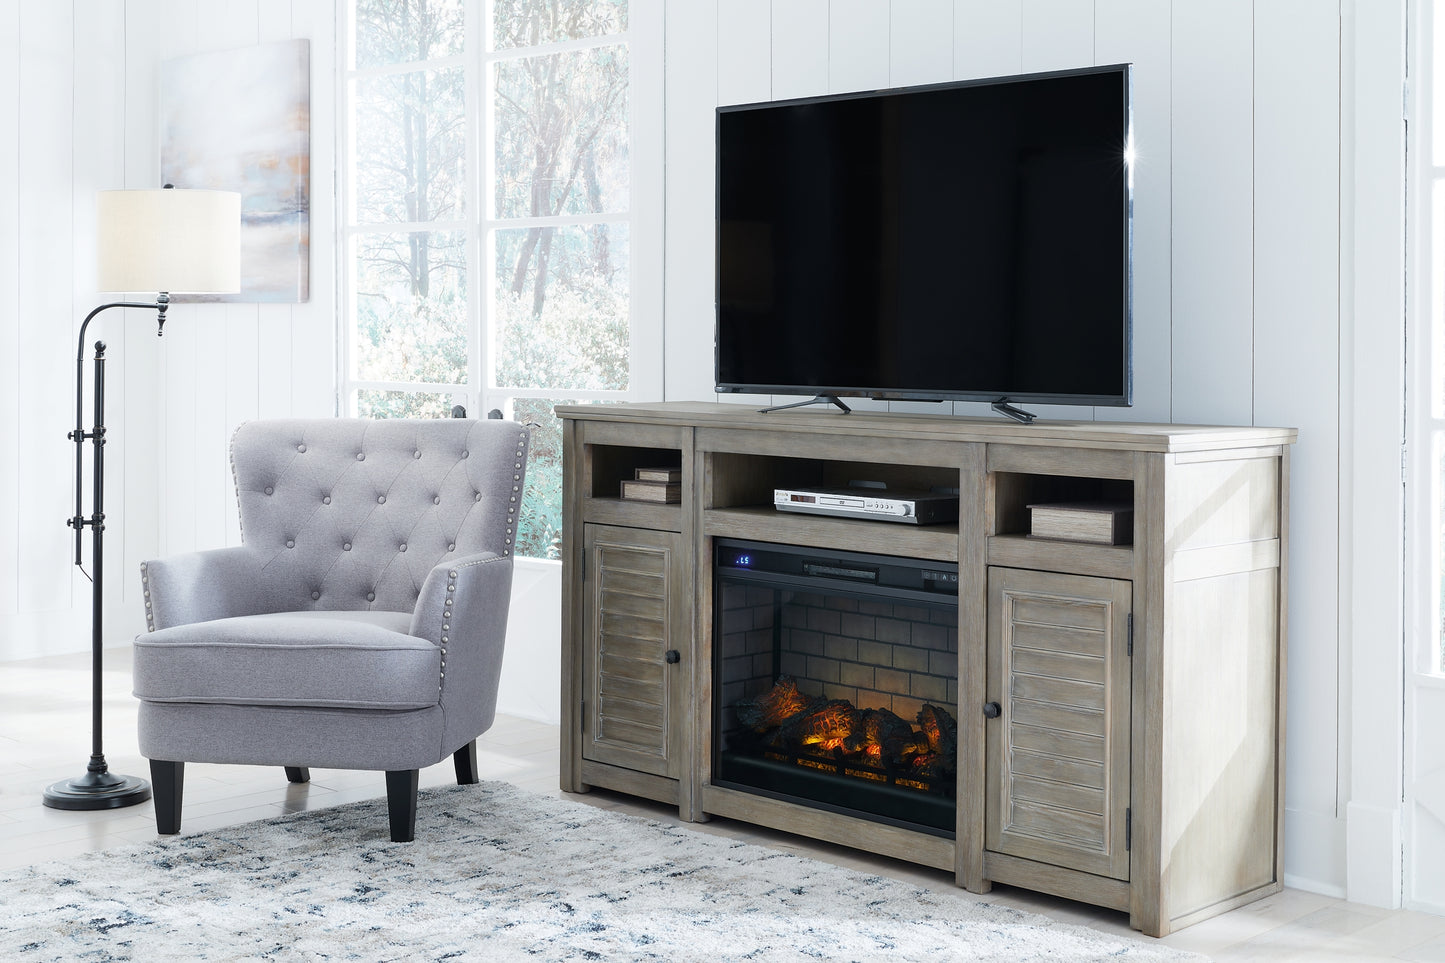 Moreshire 72" TV Stand with Electric Fireplace JB's Furniture Furniture, Bedroom, Accessories